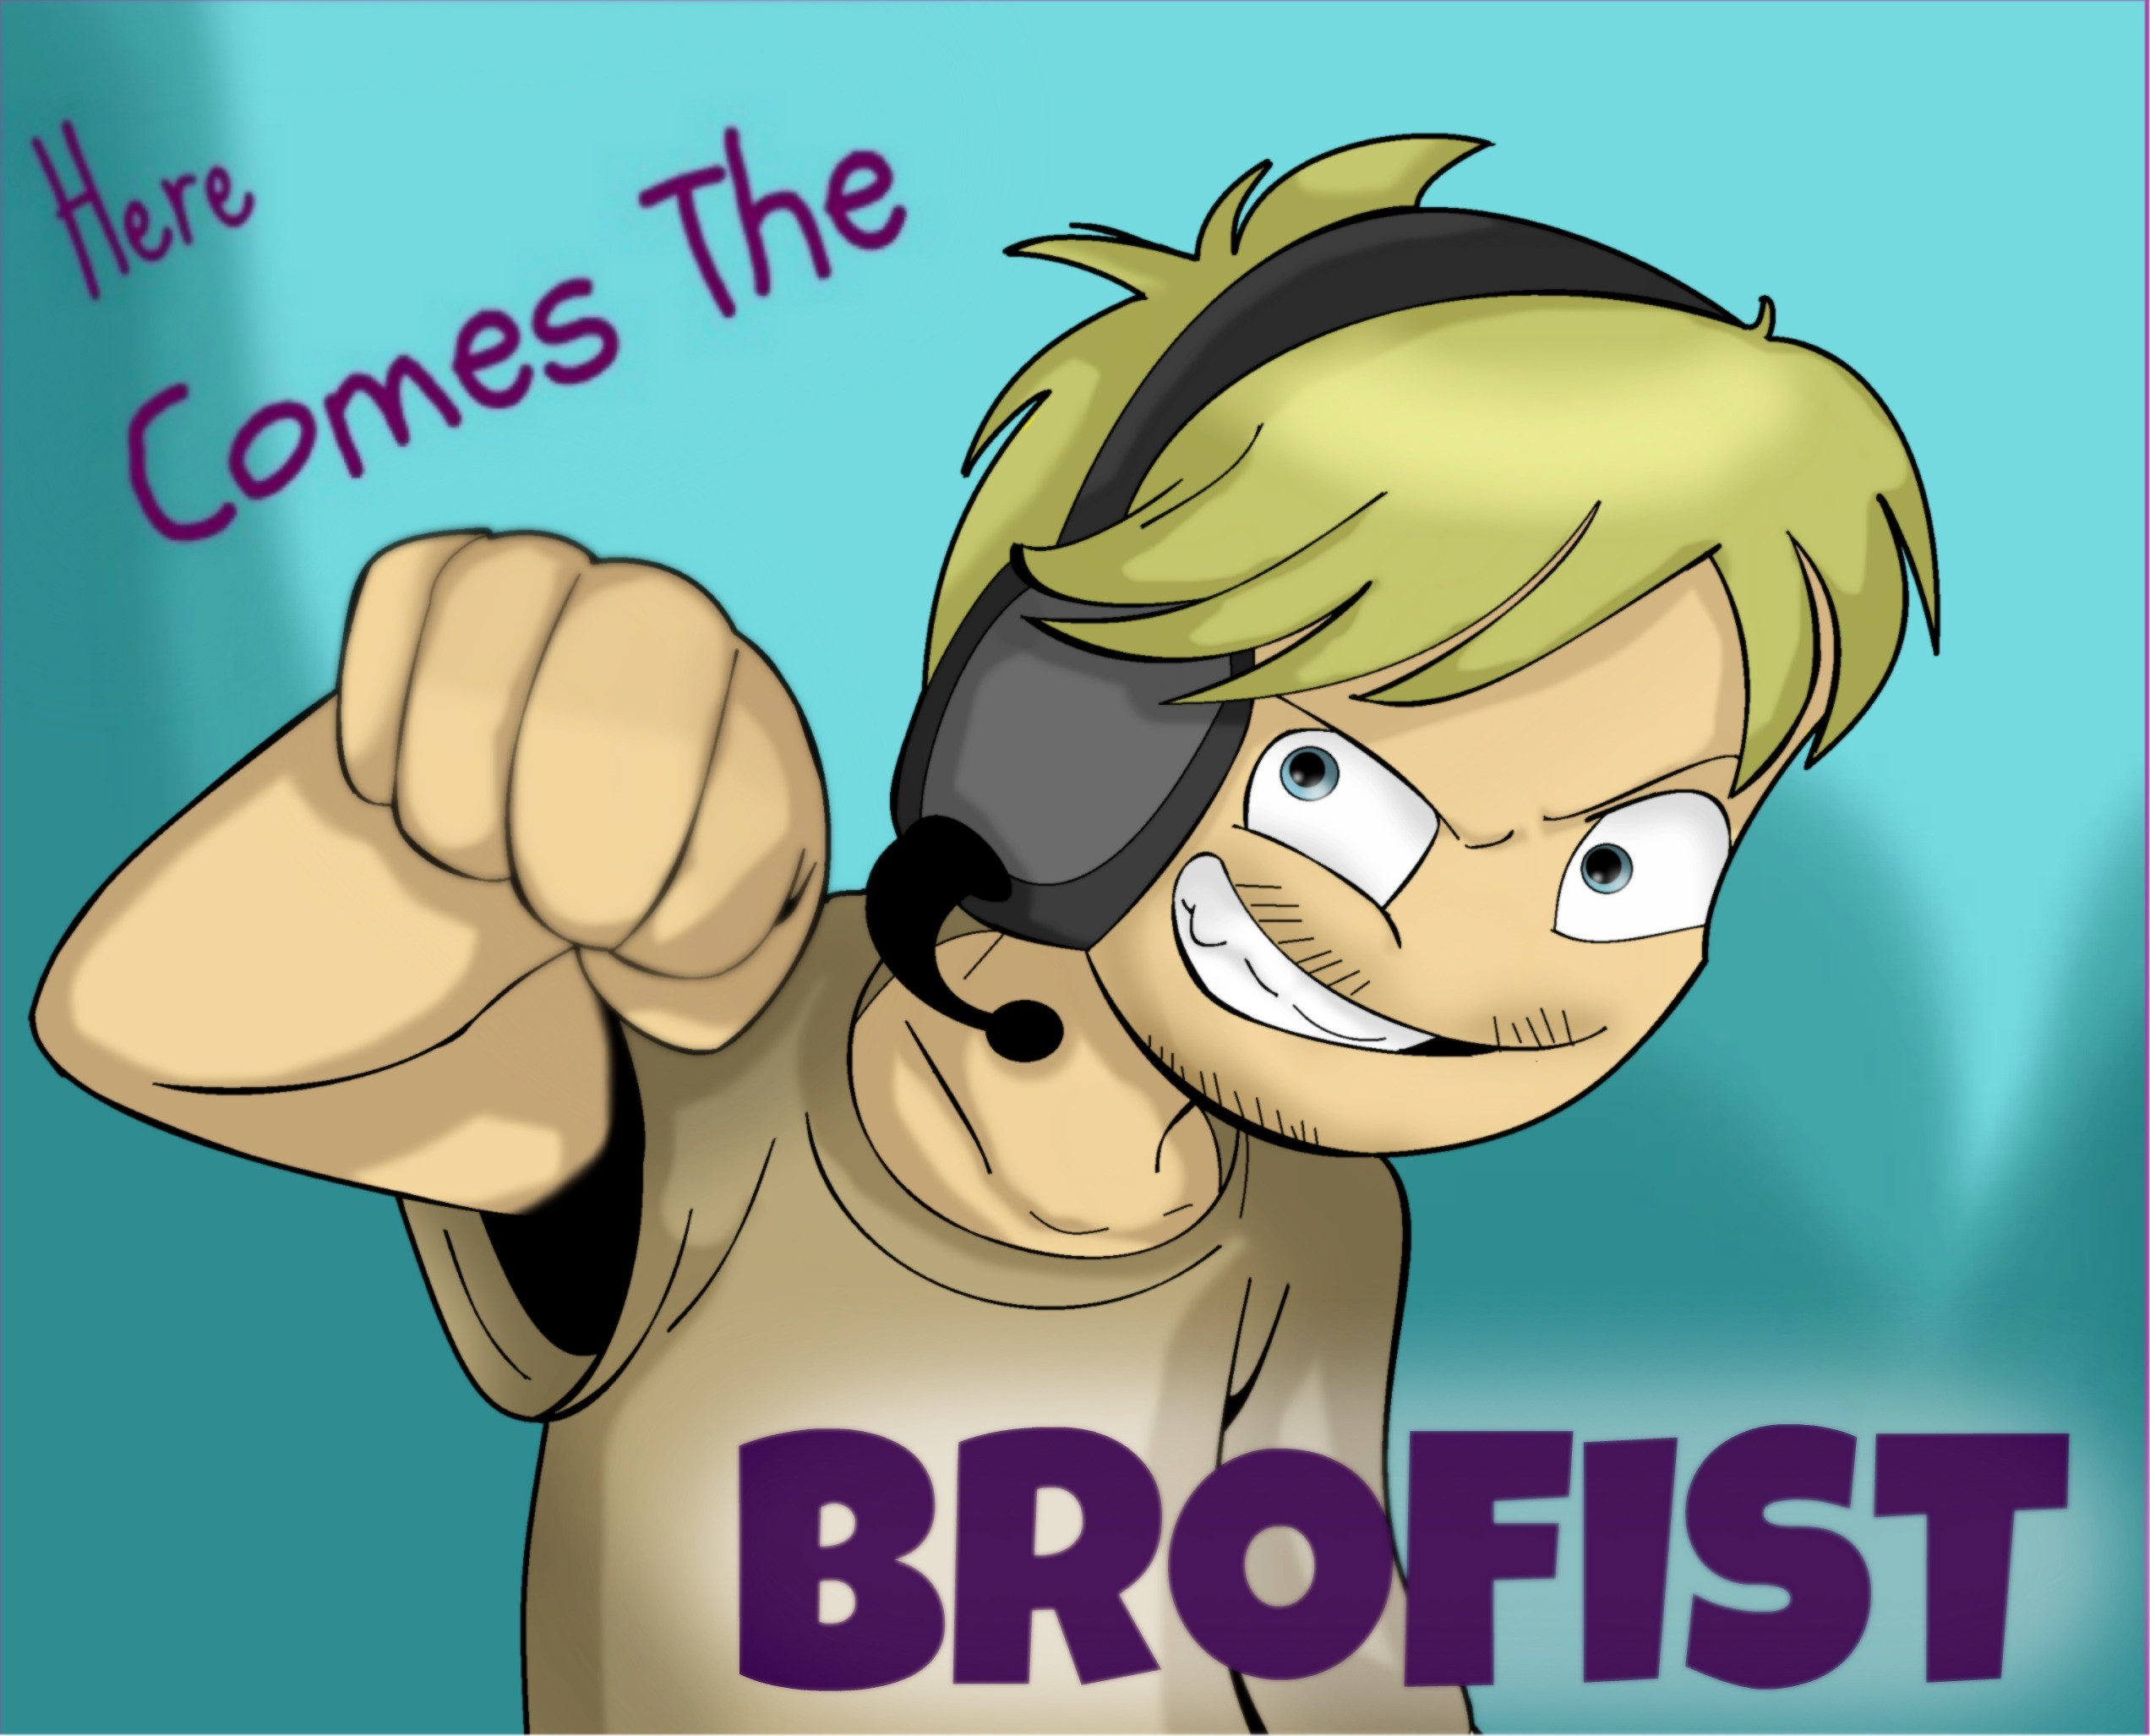 2544x2054 Here Comes The BROFIST by PolisBil Here Comes The BROFIST by PolisBil